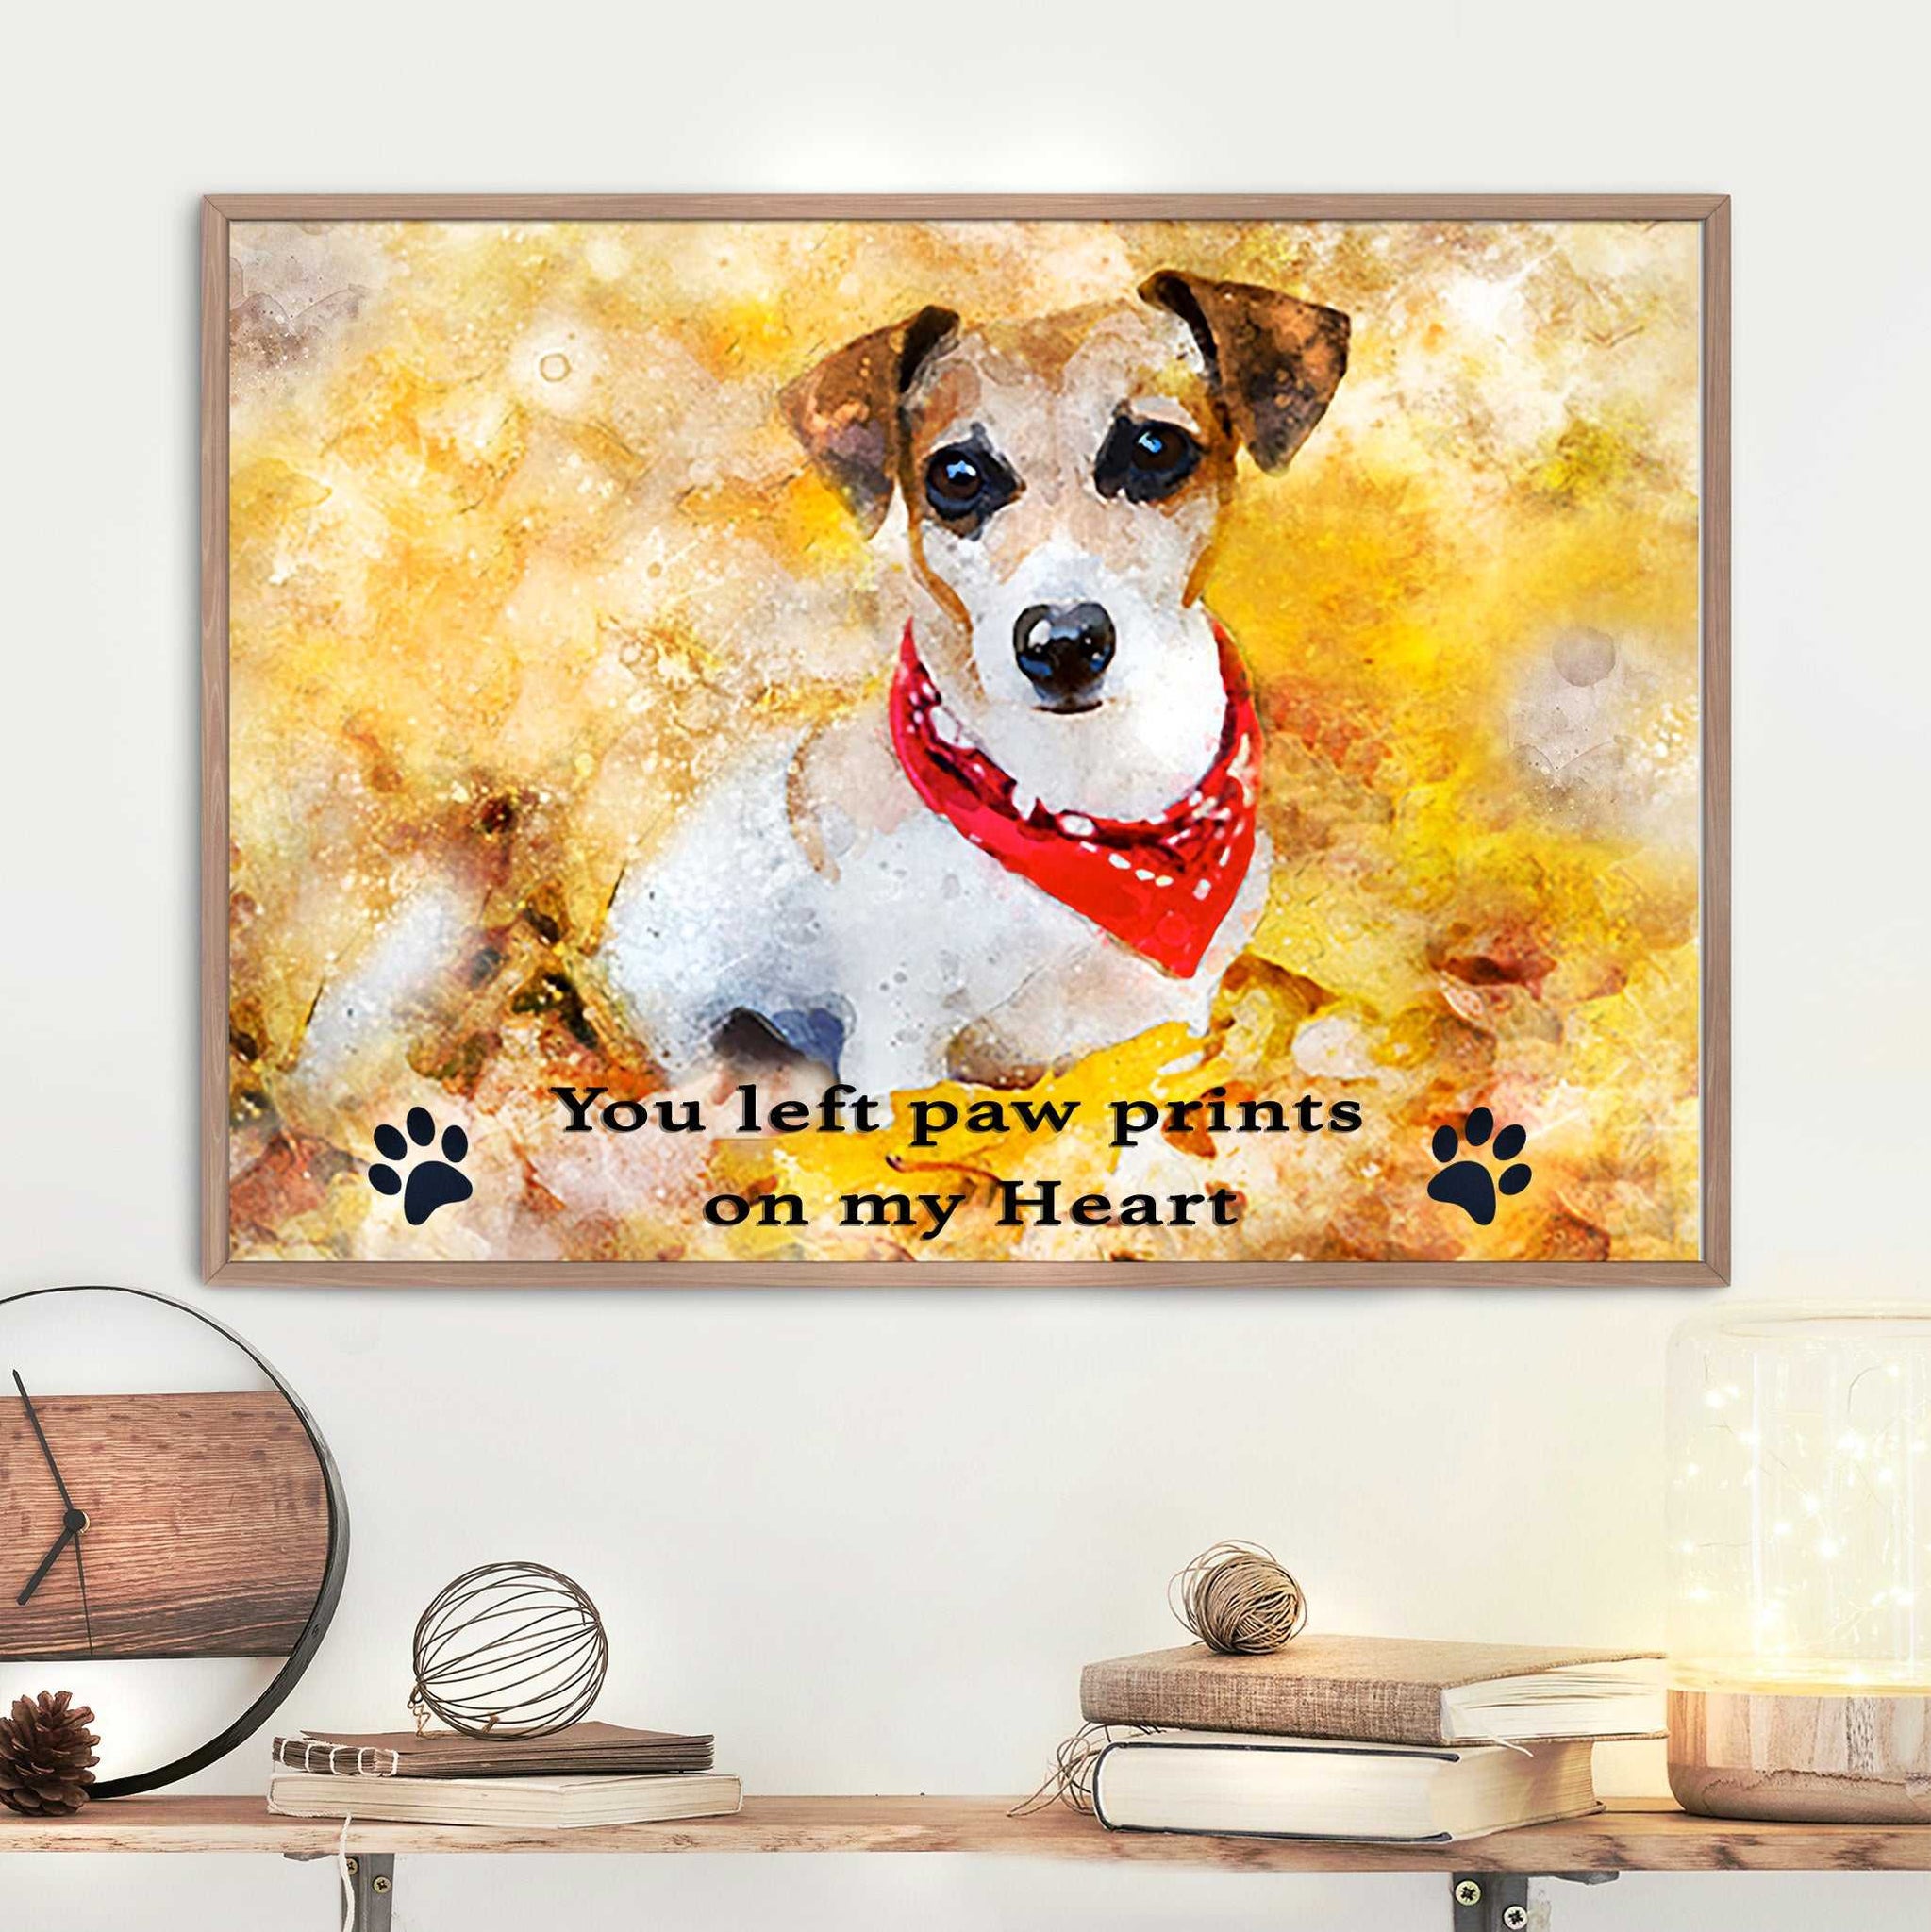 Personalized Pet Painting 🐶🐾🐈 Custom Dog and Cat Portraits from Photo - FromPicToArt